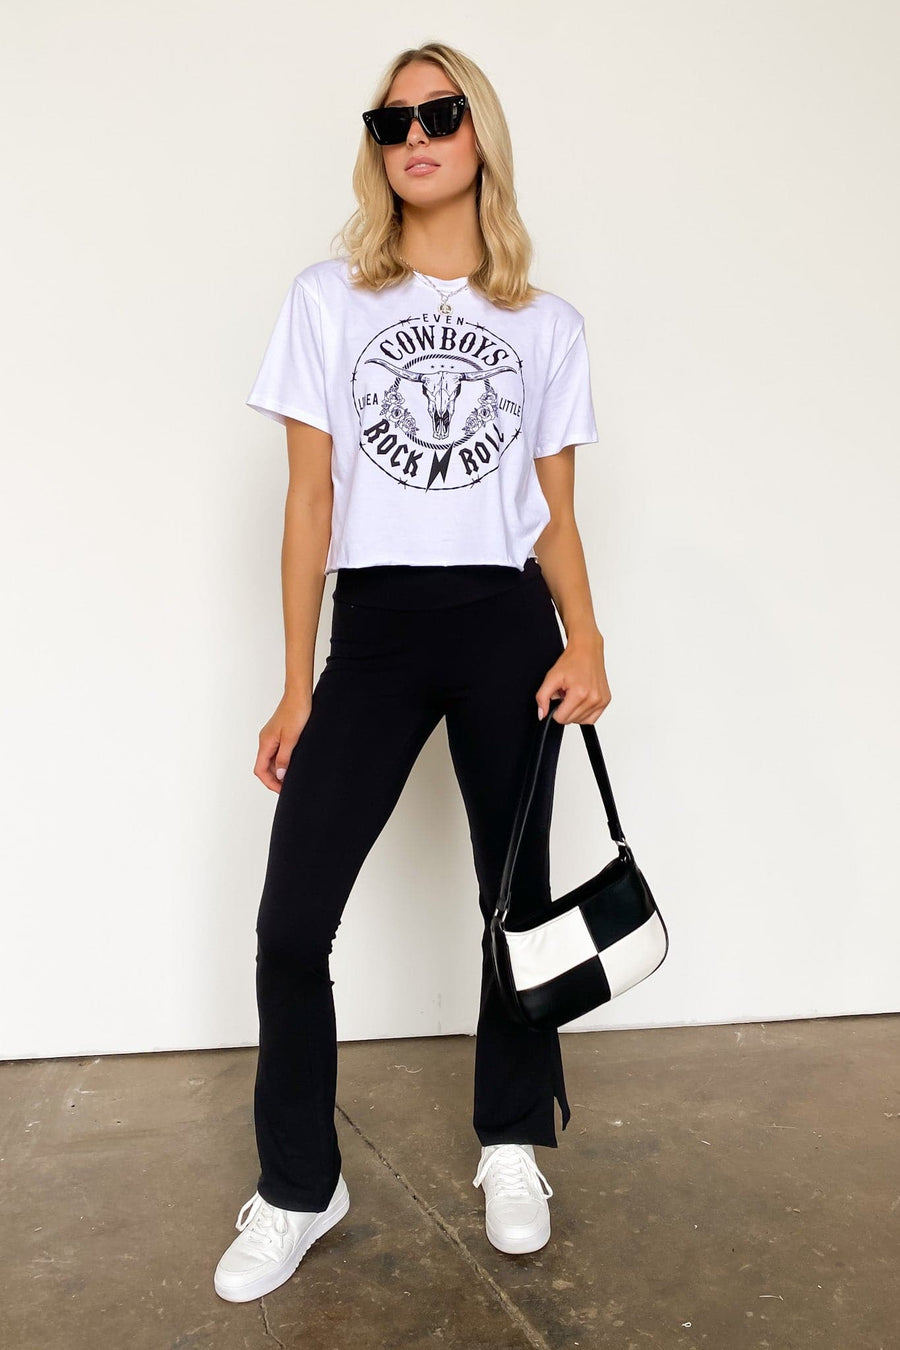  Cowboys Rock and Roll Cropped Graphic Tee - FINAL SALE - kitchencabinetmagic